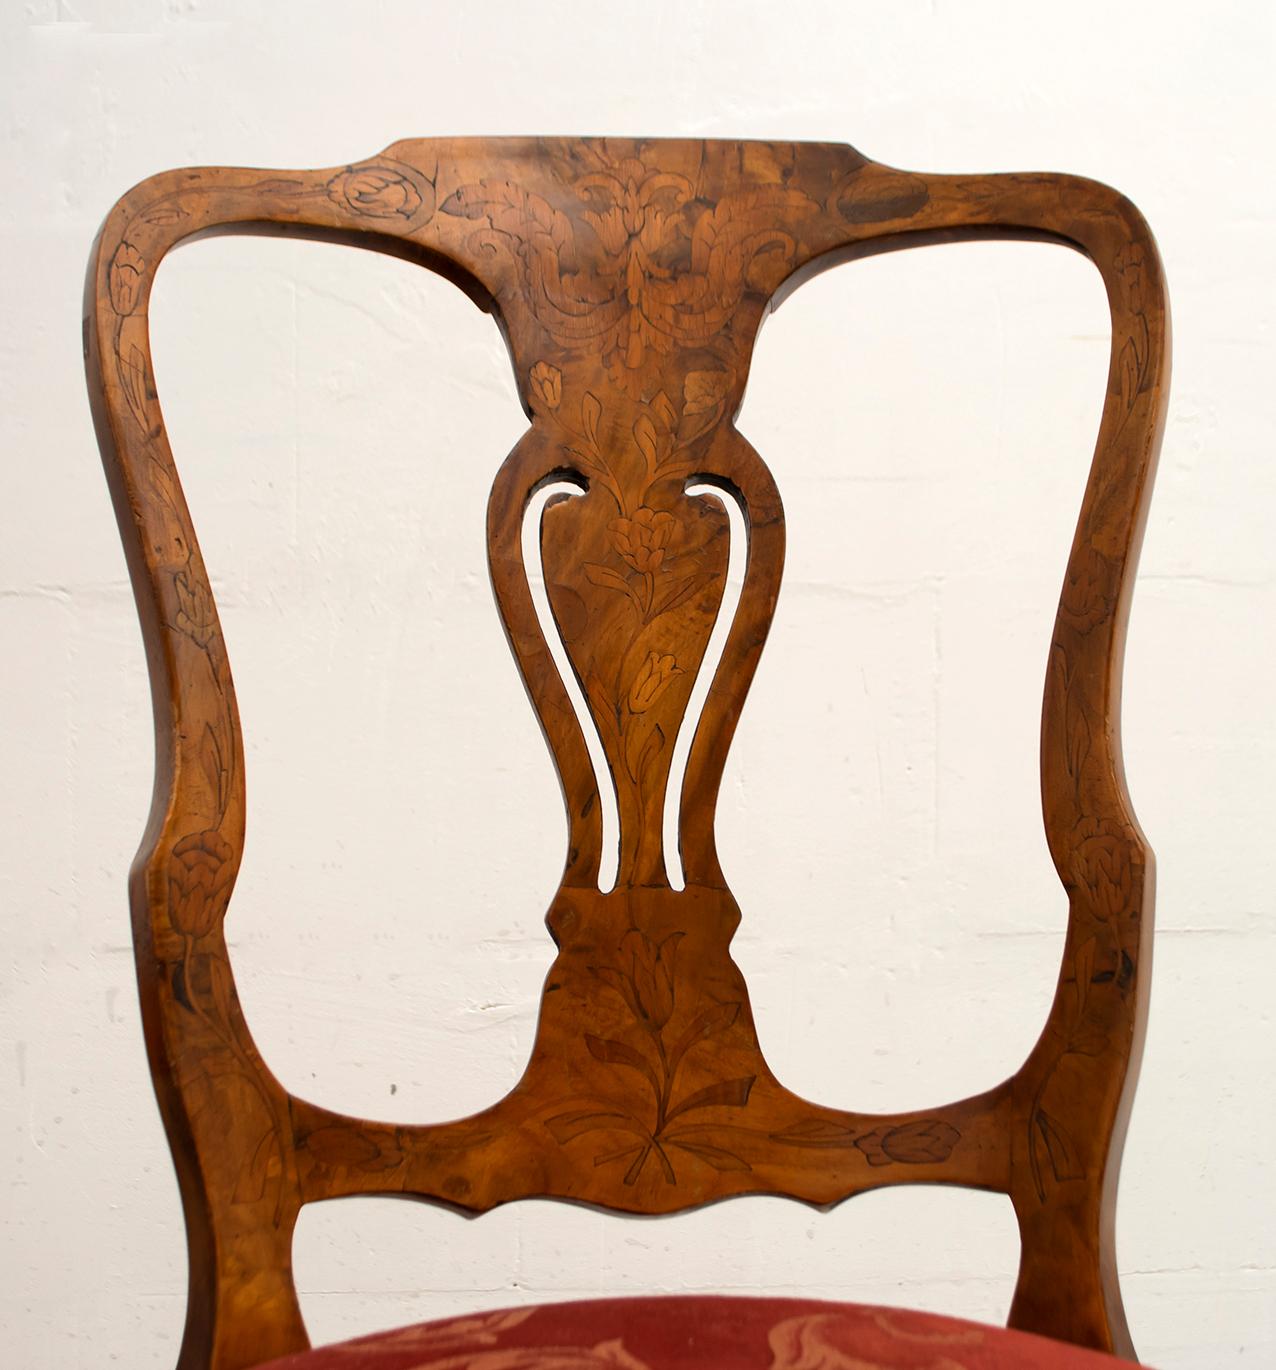 Walnut Dutch Chairs of the 20th Century with Maple Wood Inlays, Netherlands For Sale 6